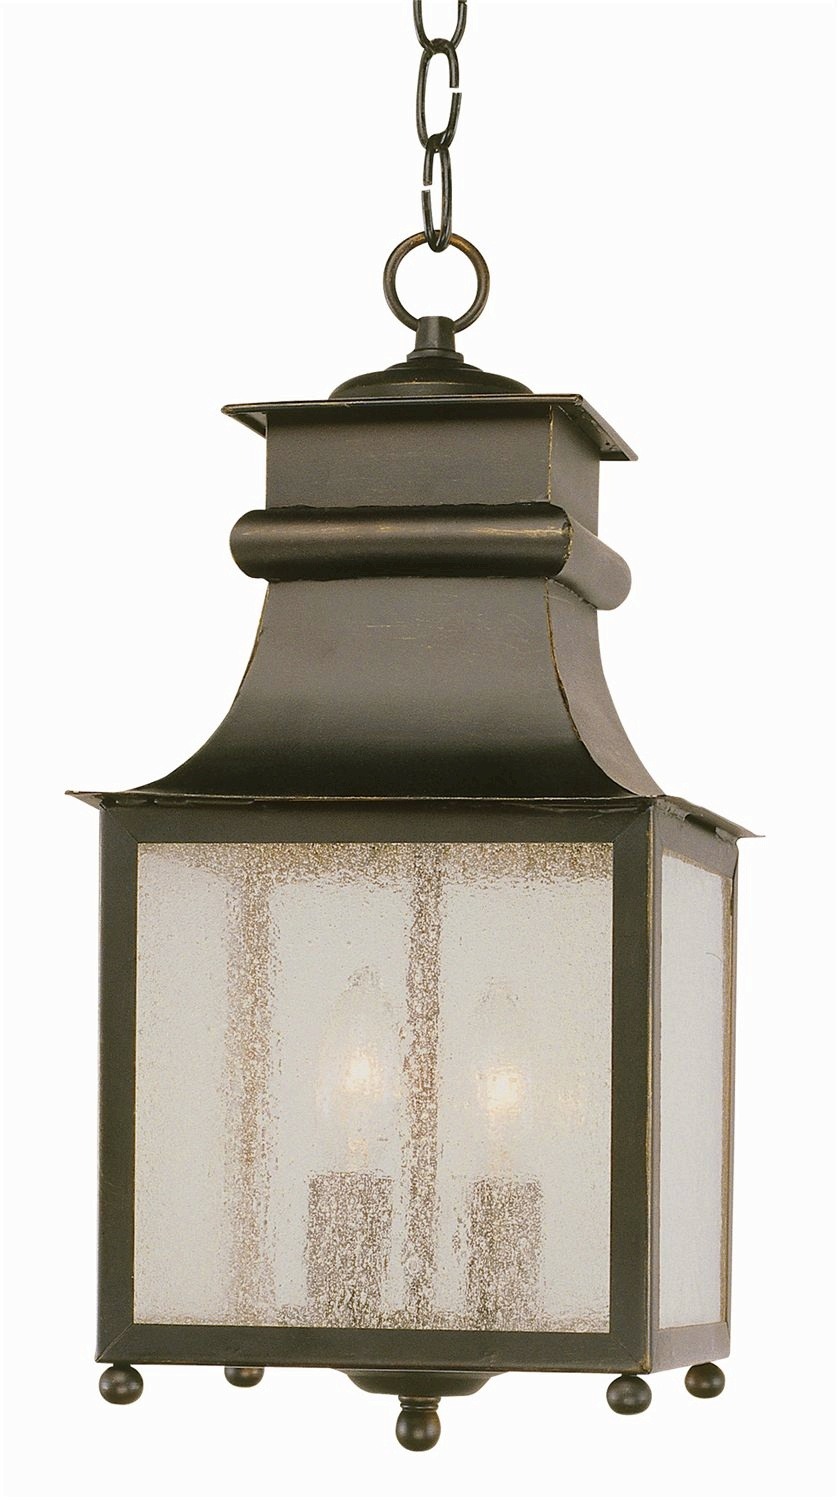 Trans Globe Lighting - Two Light Outdoor Hanging Lantern   Two Light Outdoor - image 1 of 1